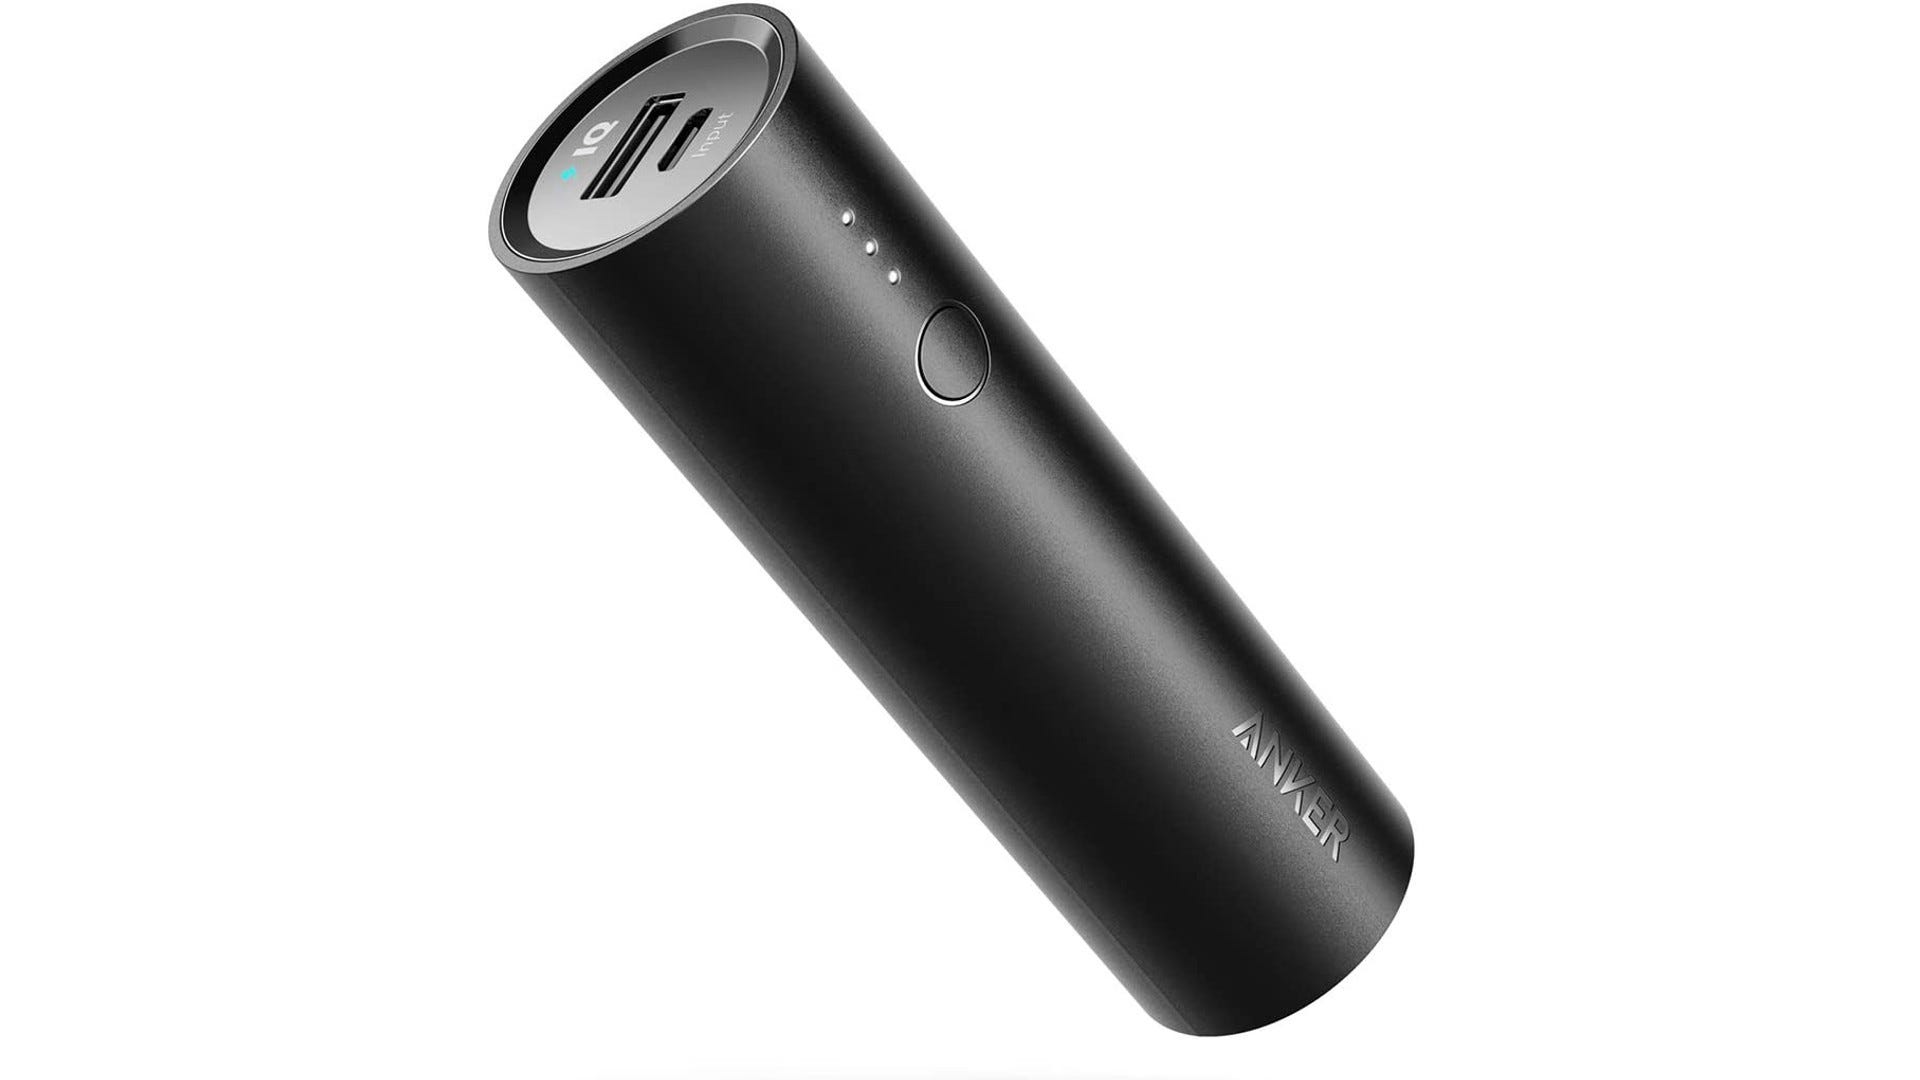 An Anker Powercore 5000 portable charger